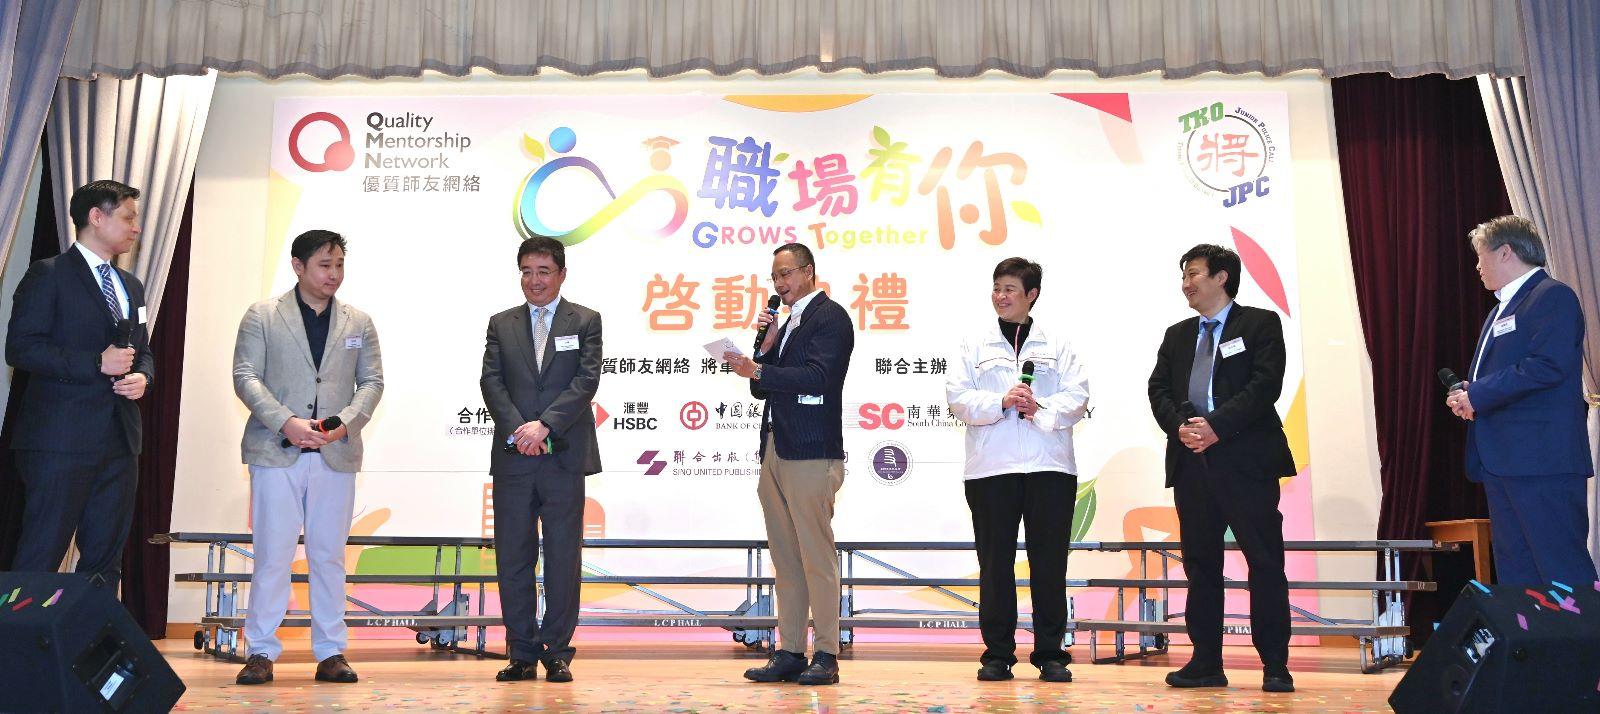 Tseung Kwan O District (TKODIST) Junior Police Call (JPC), in collaboration with Hong Kong Quality Mentorship Network (QMN), held the kick-off ceremony for the firstly-launched life planning project "GROWS Together" today (February 4). Photo shows the Chairman of the TKODIST JPC Honorary President Council, Mr Ng Loi-sing (centre) chatting with representatives of supporting organisations, sharing their expectation for the project.